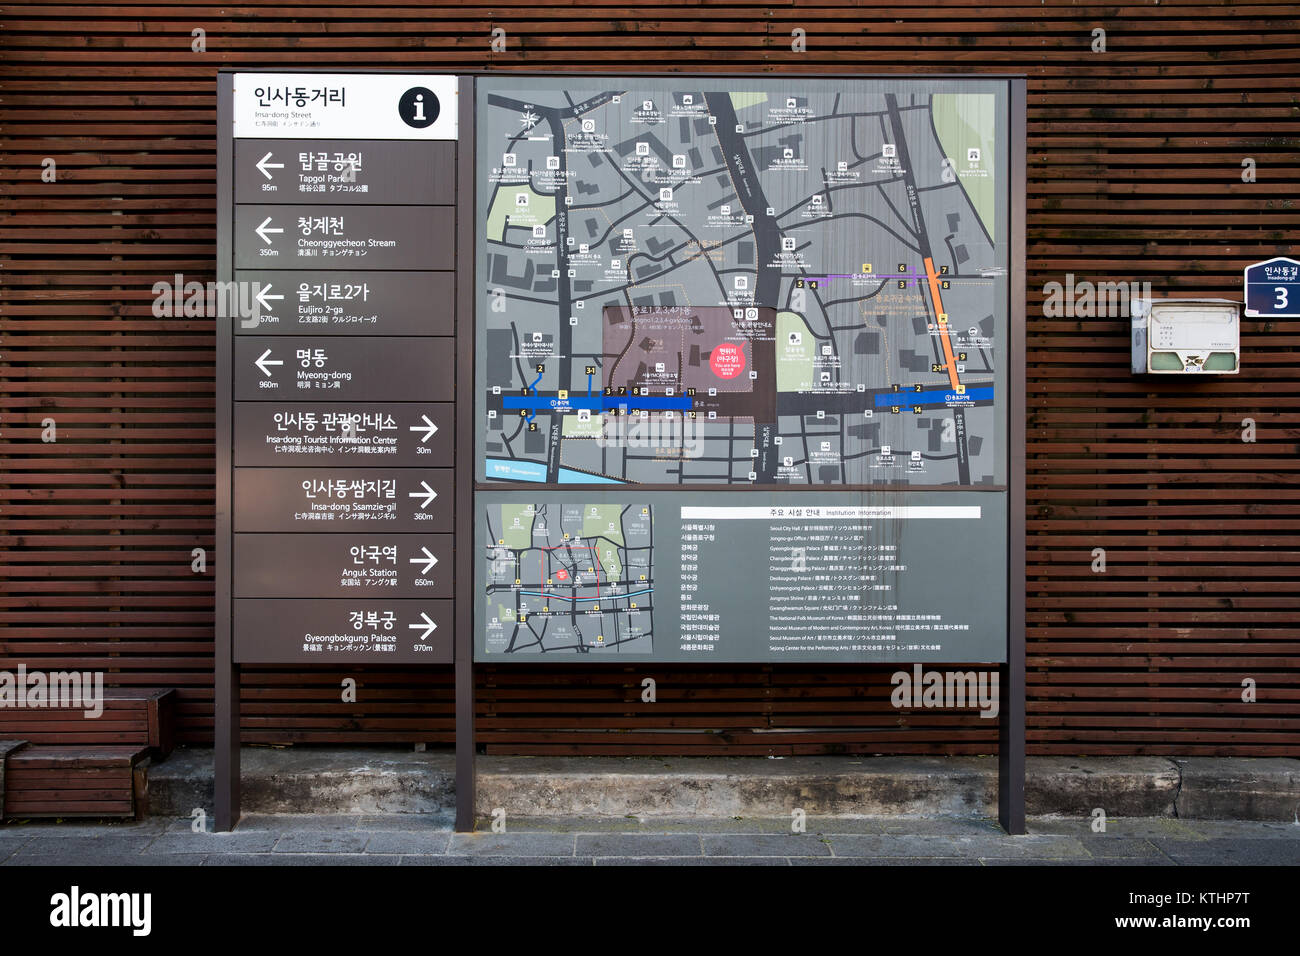 Insa-dong, SEOUL, SOUTH KOREA - November 21, 2017:Insa-dong Street Information Sign. Insa-dong is Beautiful Street with Tradition and Culture in Seoul Stock Photo